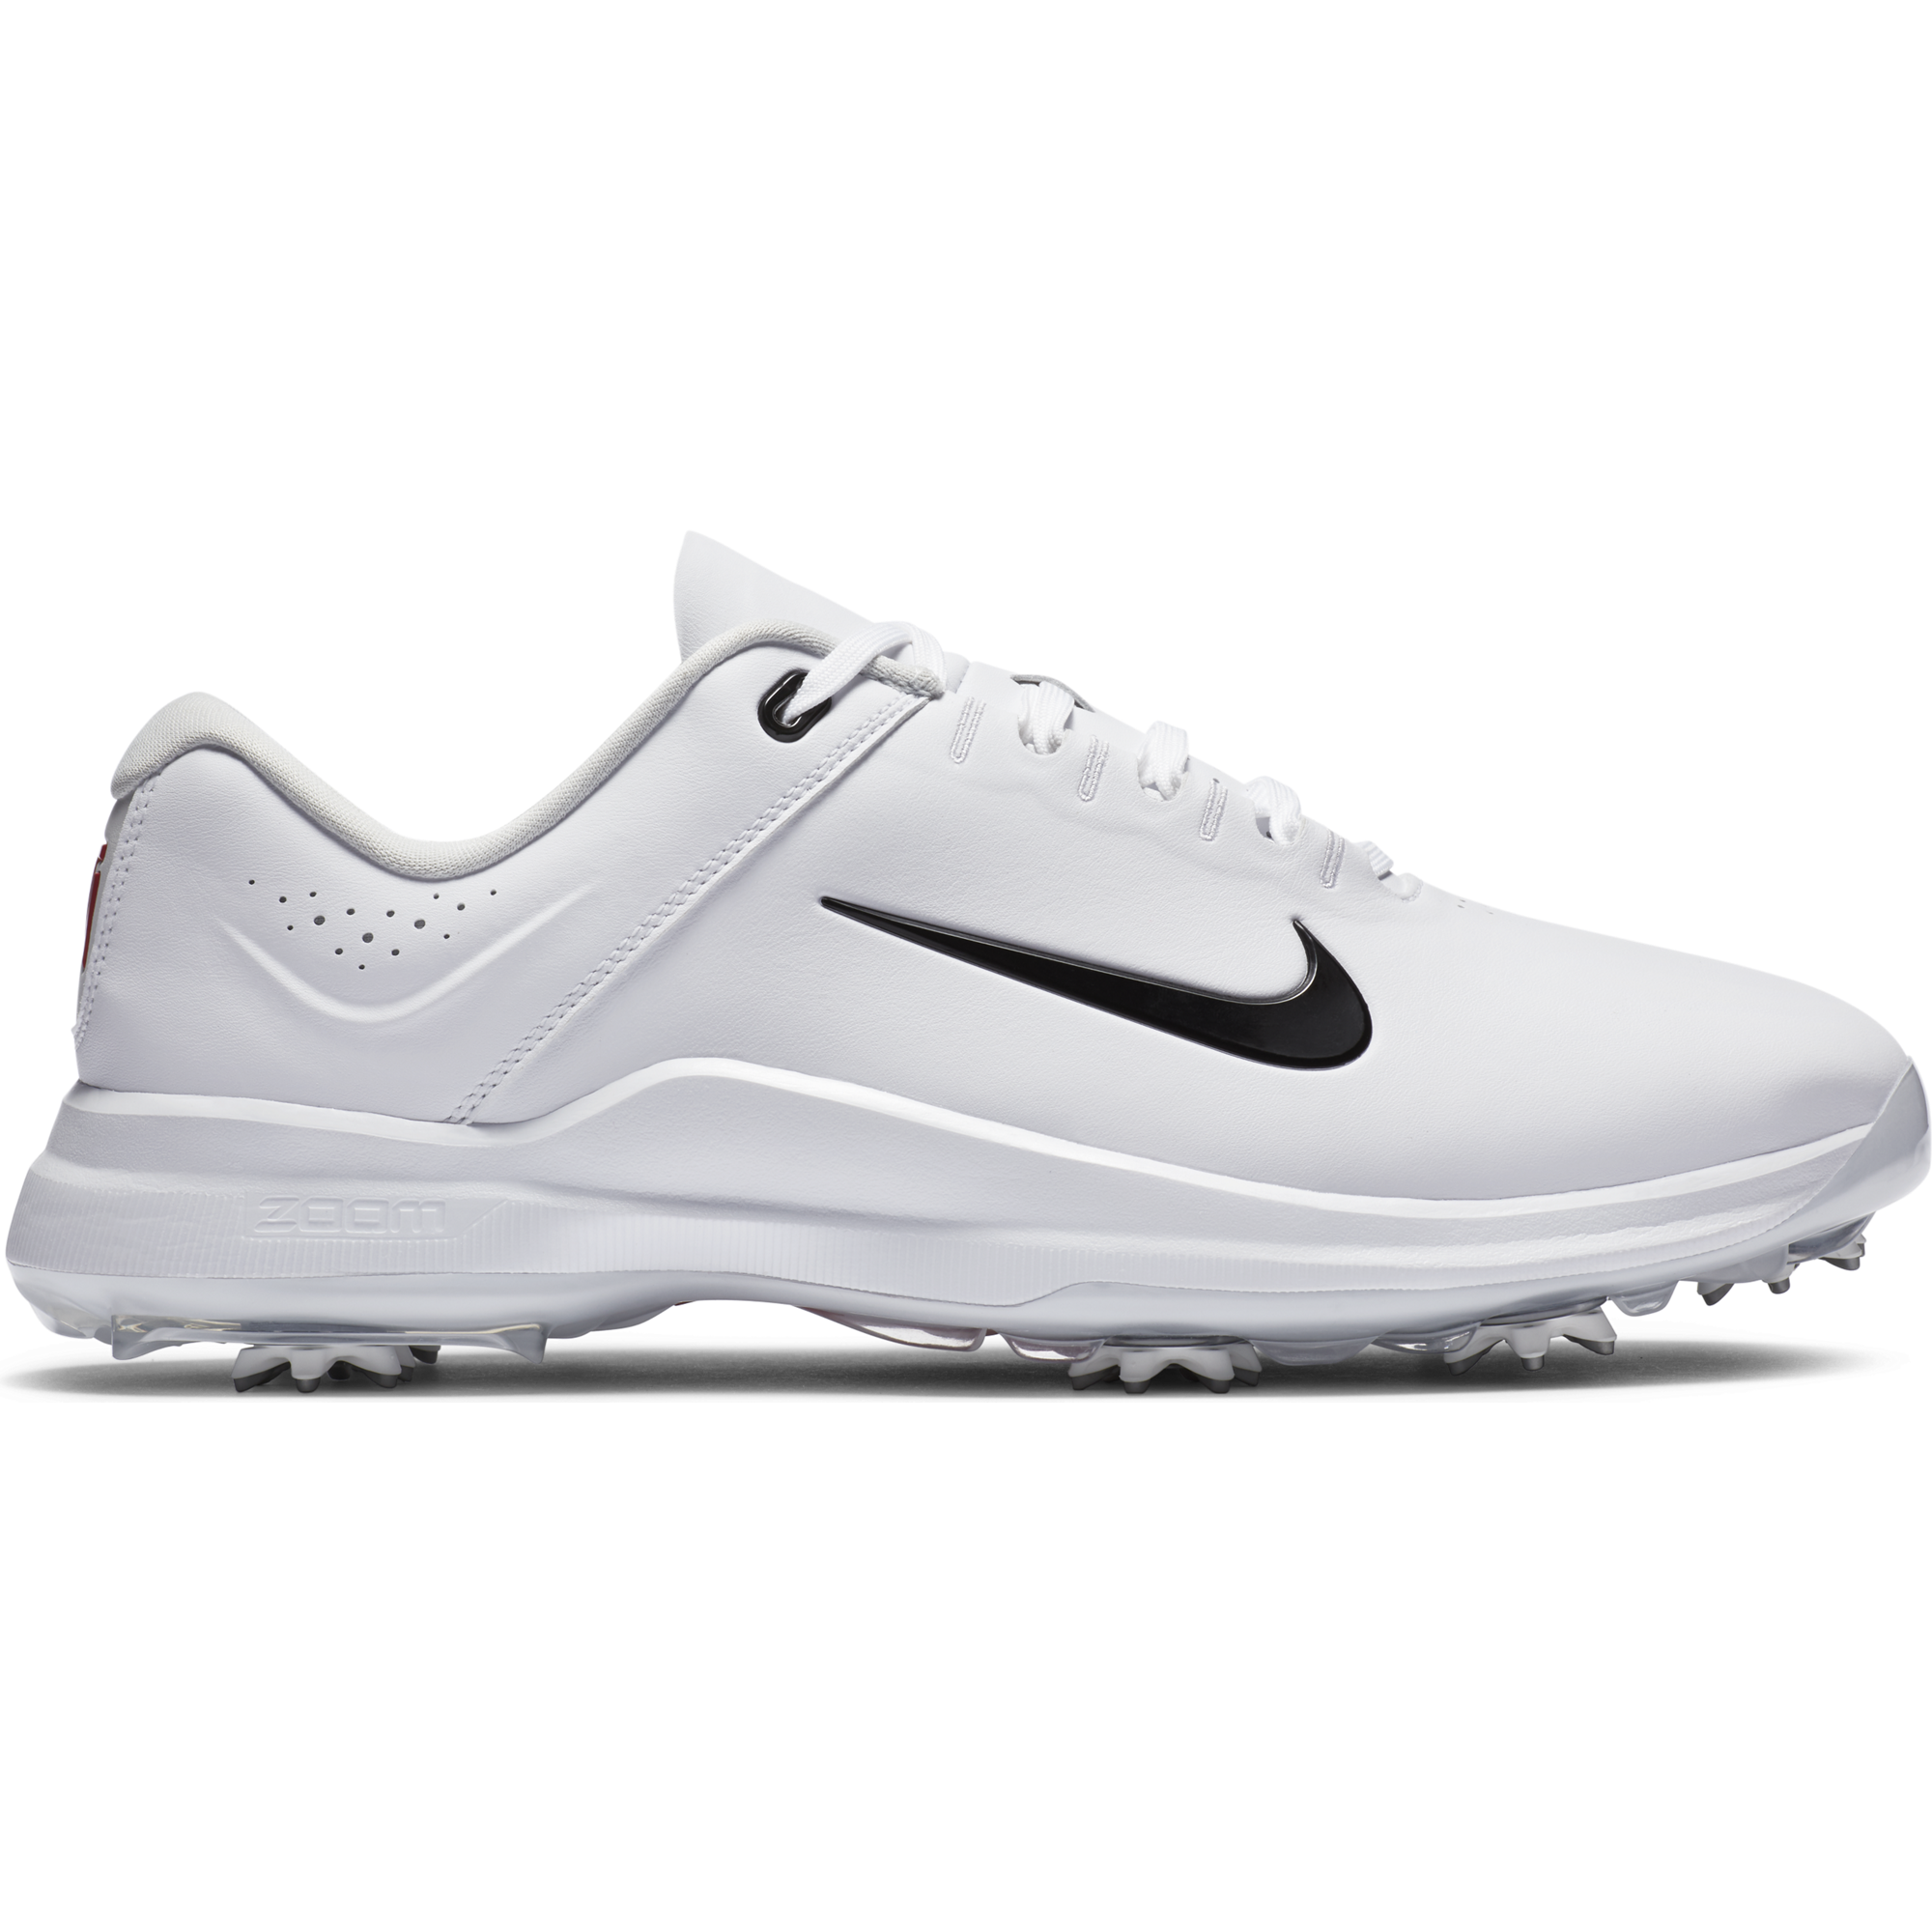 nike men's spiked golf shoes